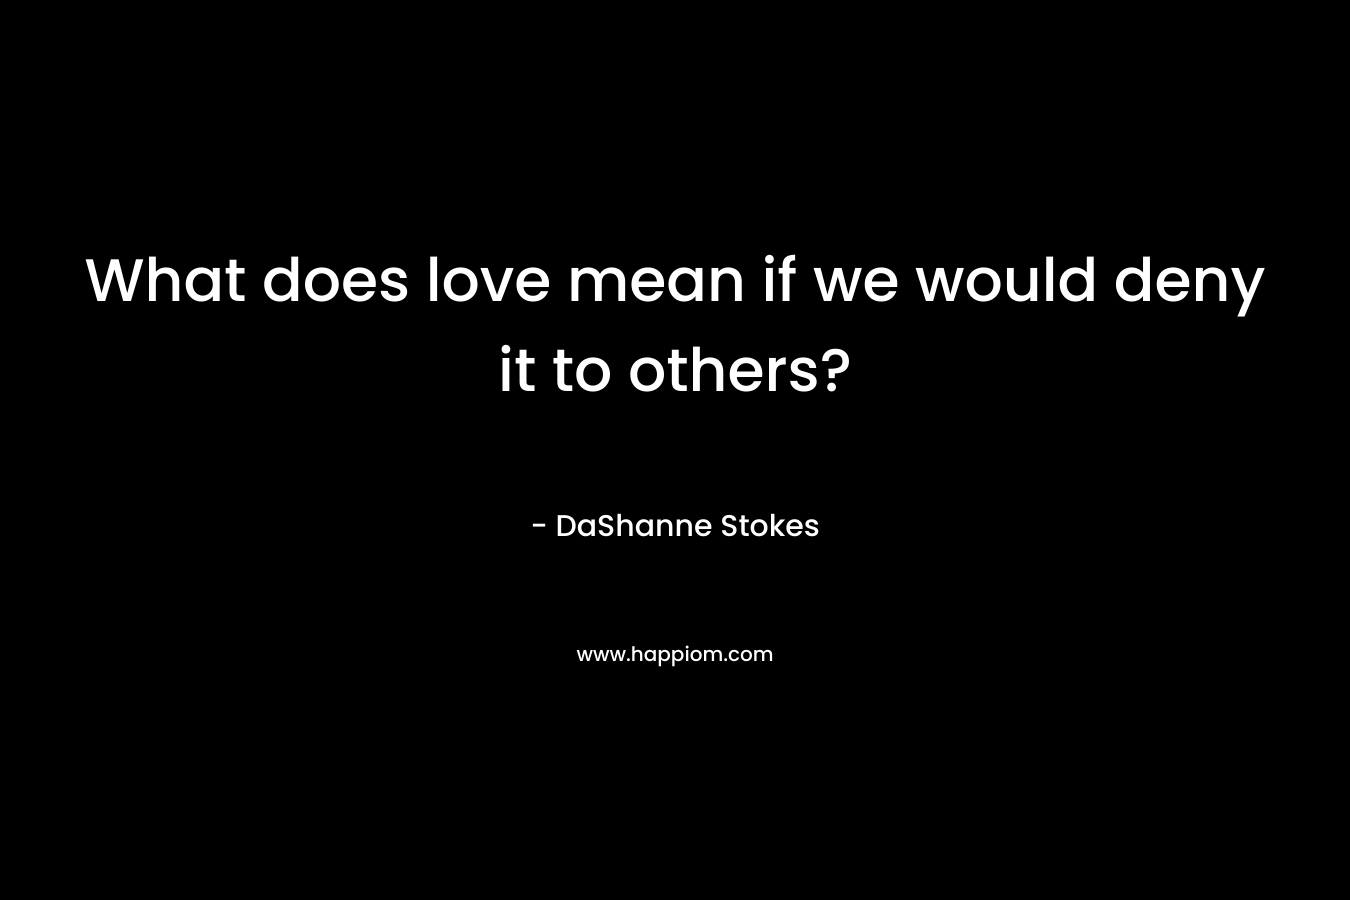 What does love mean if we would deny it to others?